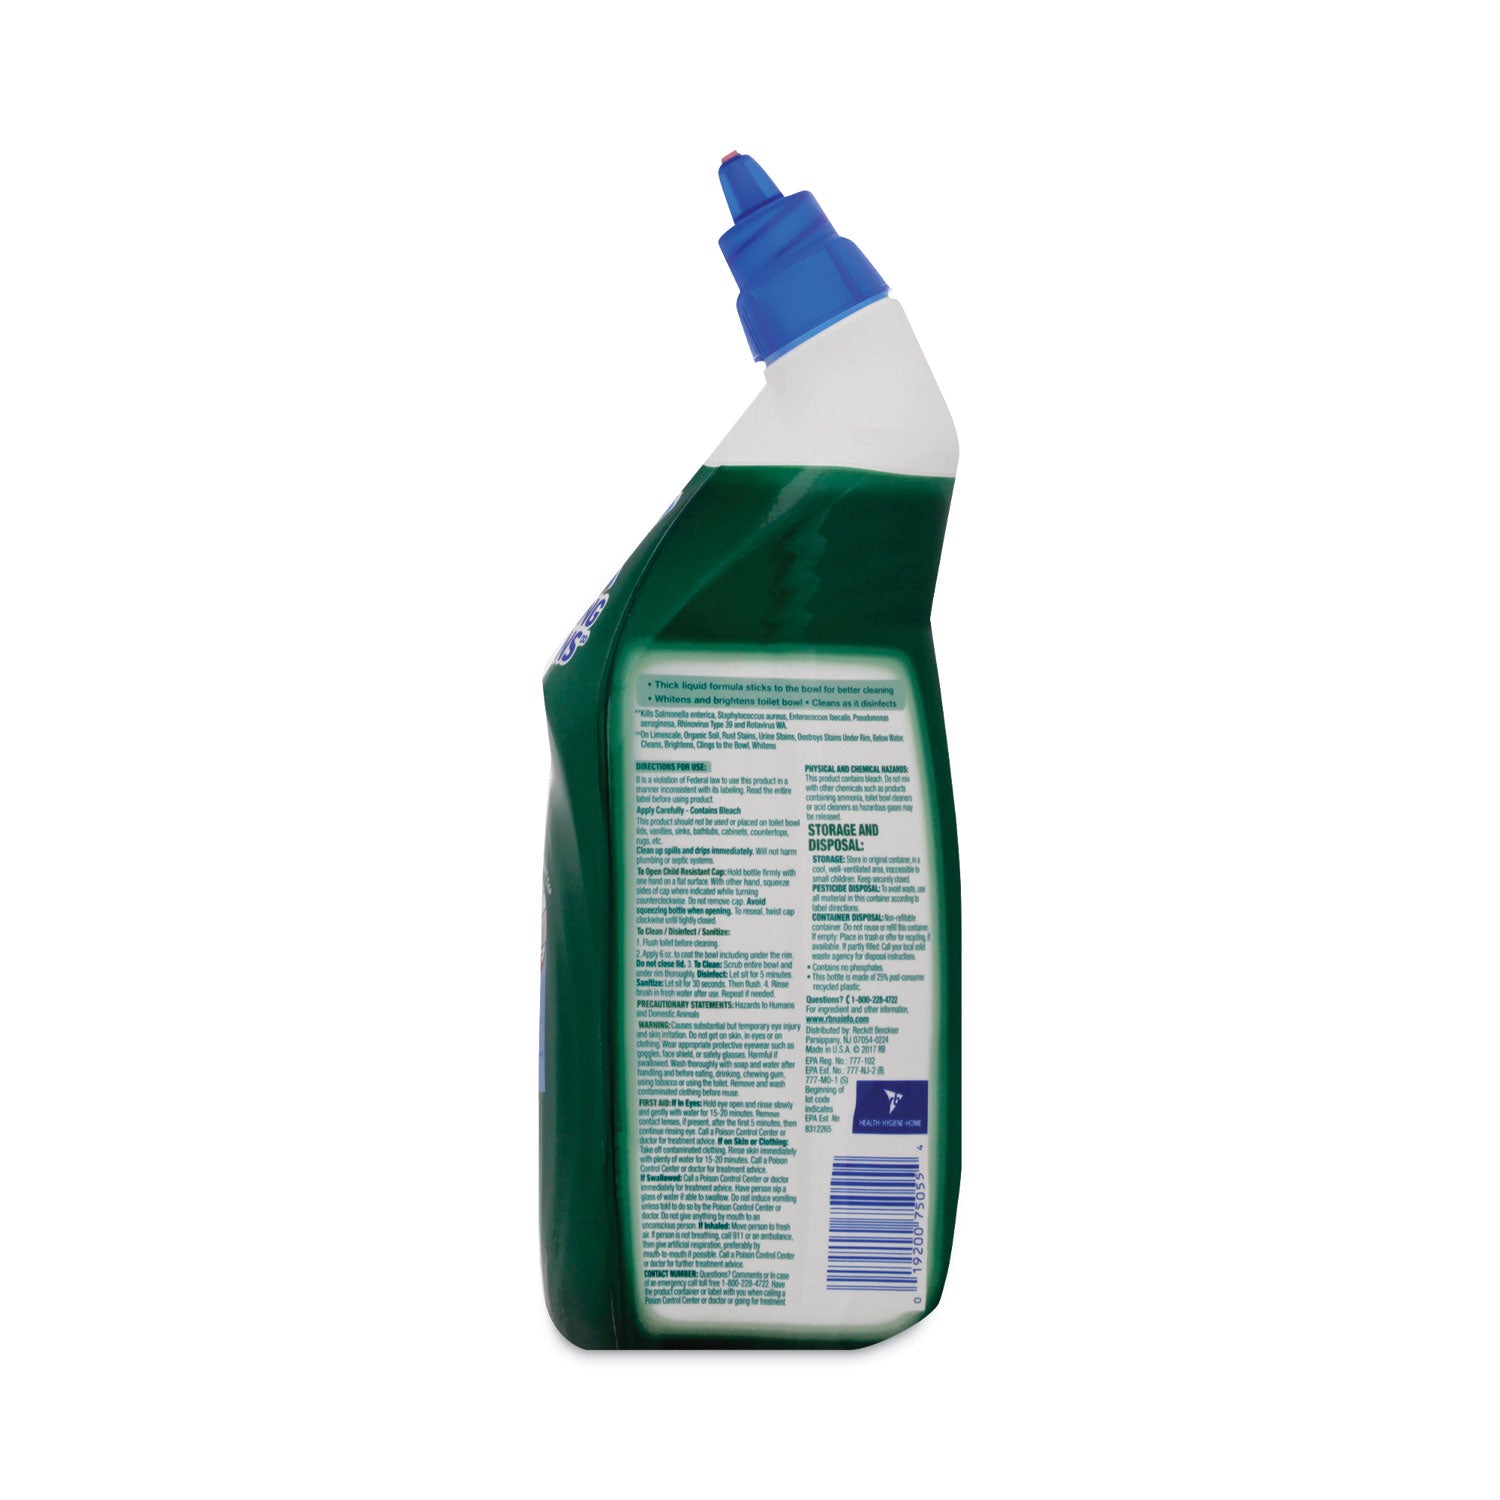 disinfectant-toilet-bowl-cleaner-with-bleach-24-oz-8-carton_rac96085 - 2